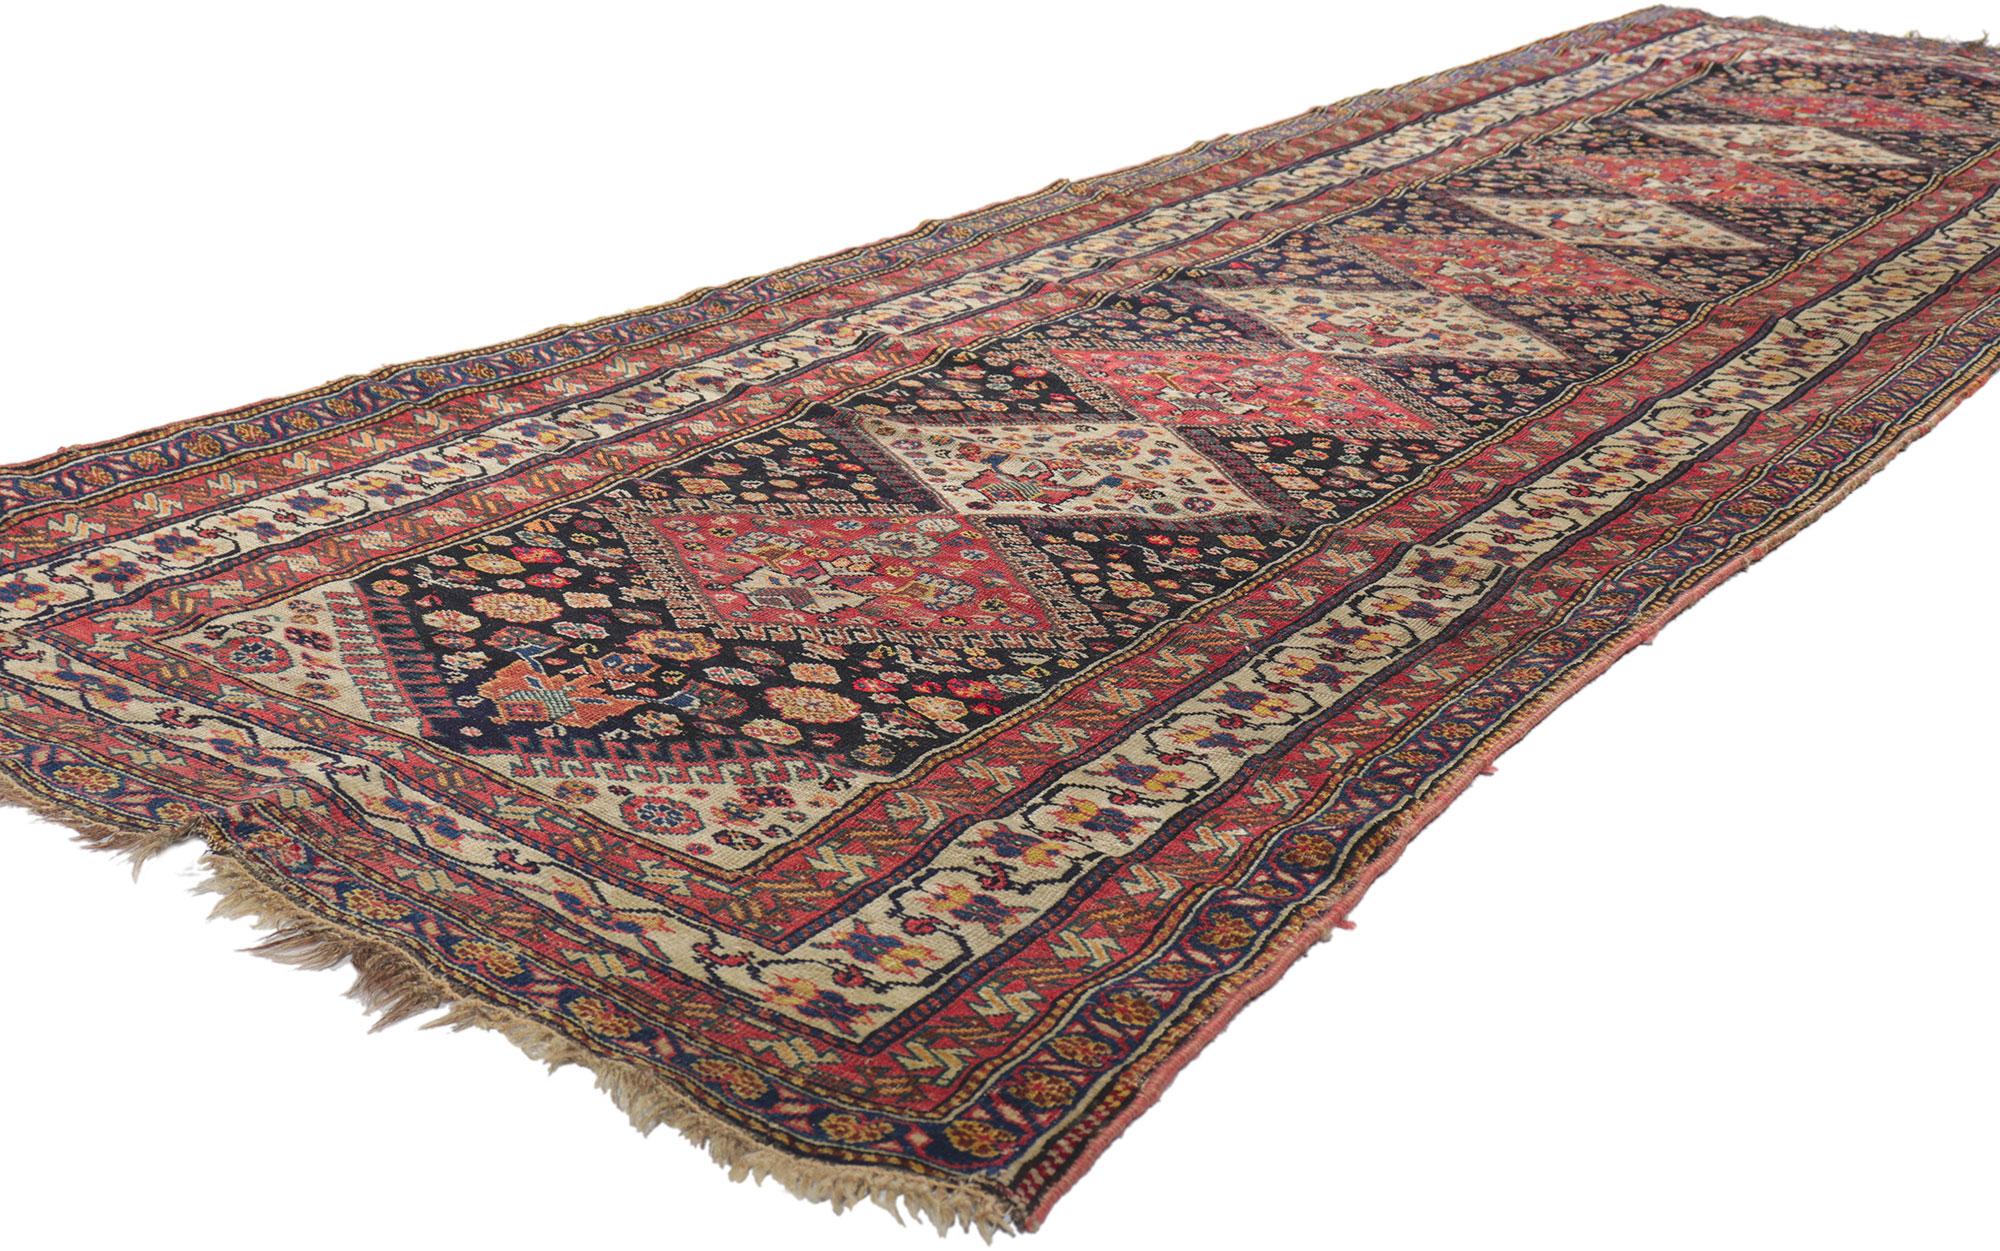 78454 Antique Persian Shiraz Runner, 03'03 x 10'11. Full of tiny details and nomadic charm, this hand knotted wool antique Persian Shiraz runner is a captivating vision of woven beauty. The eye-catching tribal design and earthy colorway woven into